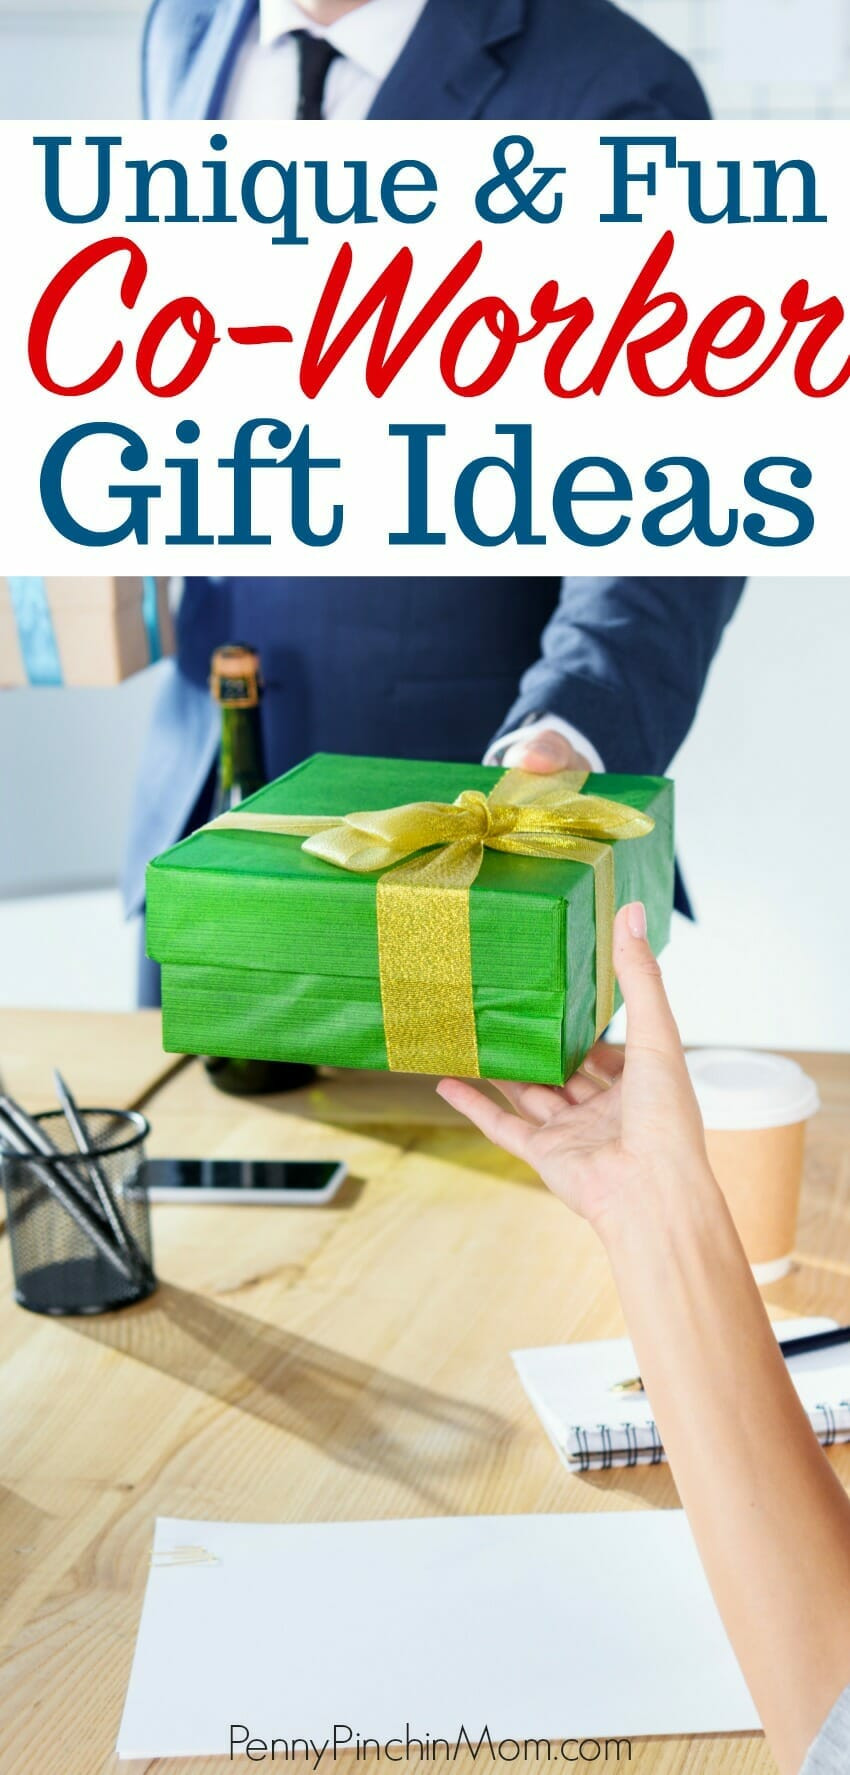 Holiday Gift Ideas Bosses
 Co Worker Gift Ideas for Anyone on Your List This Year